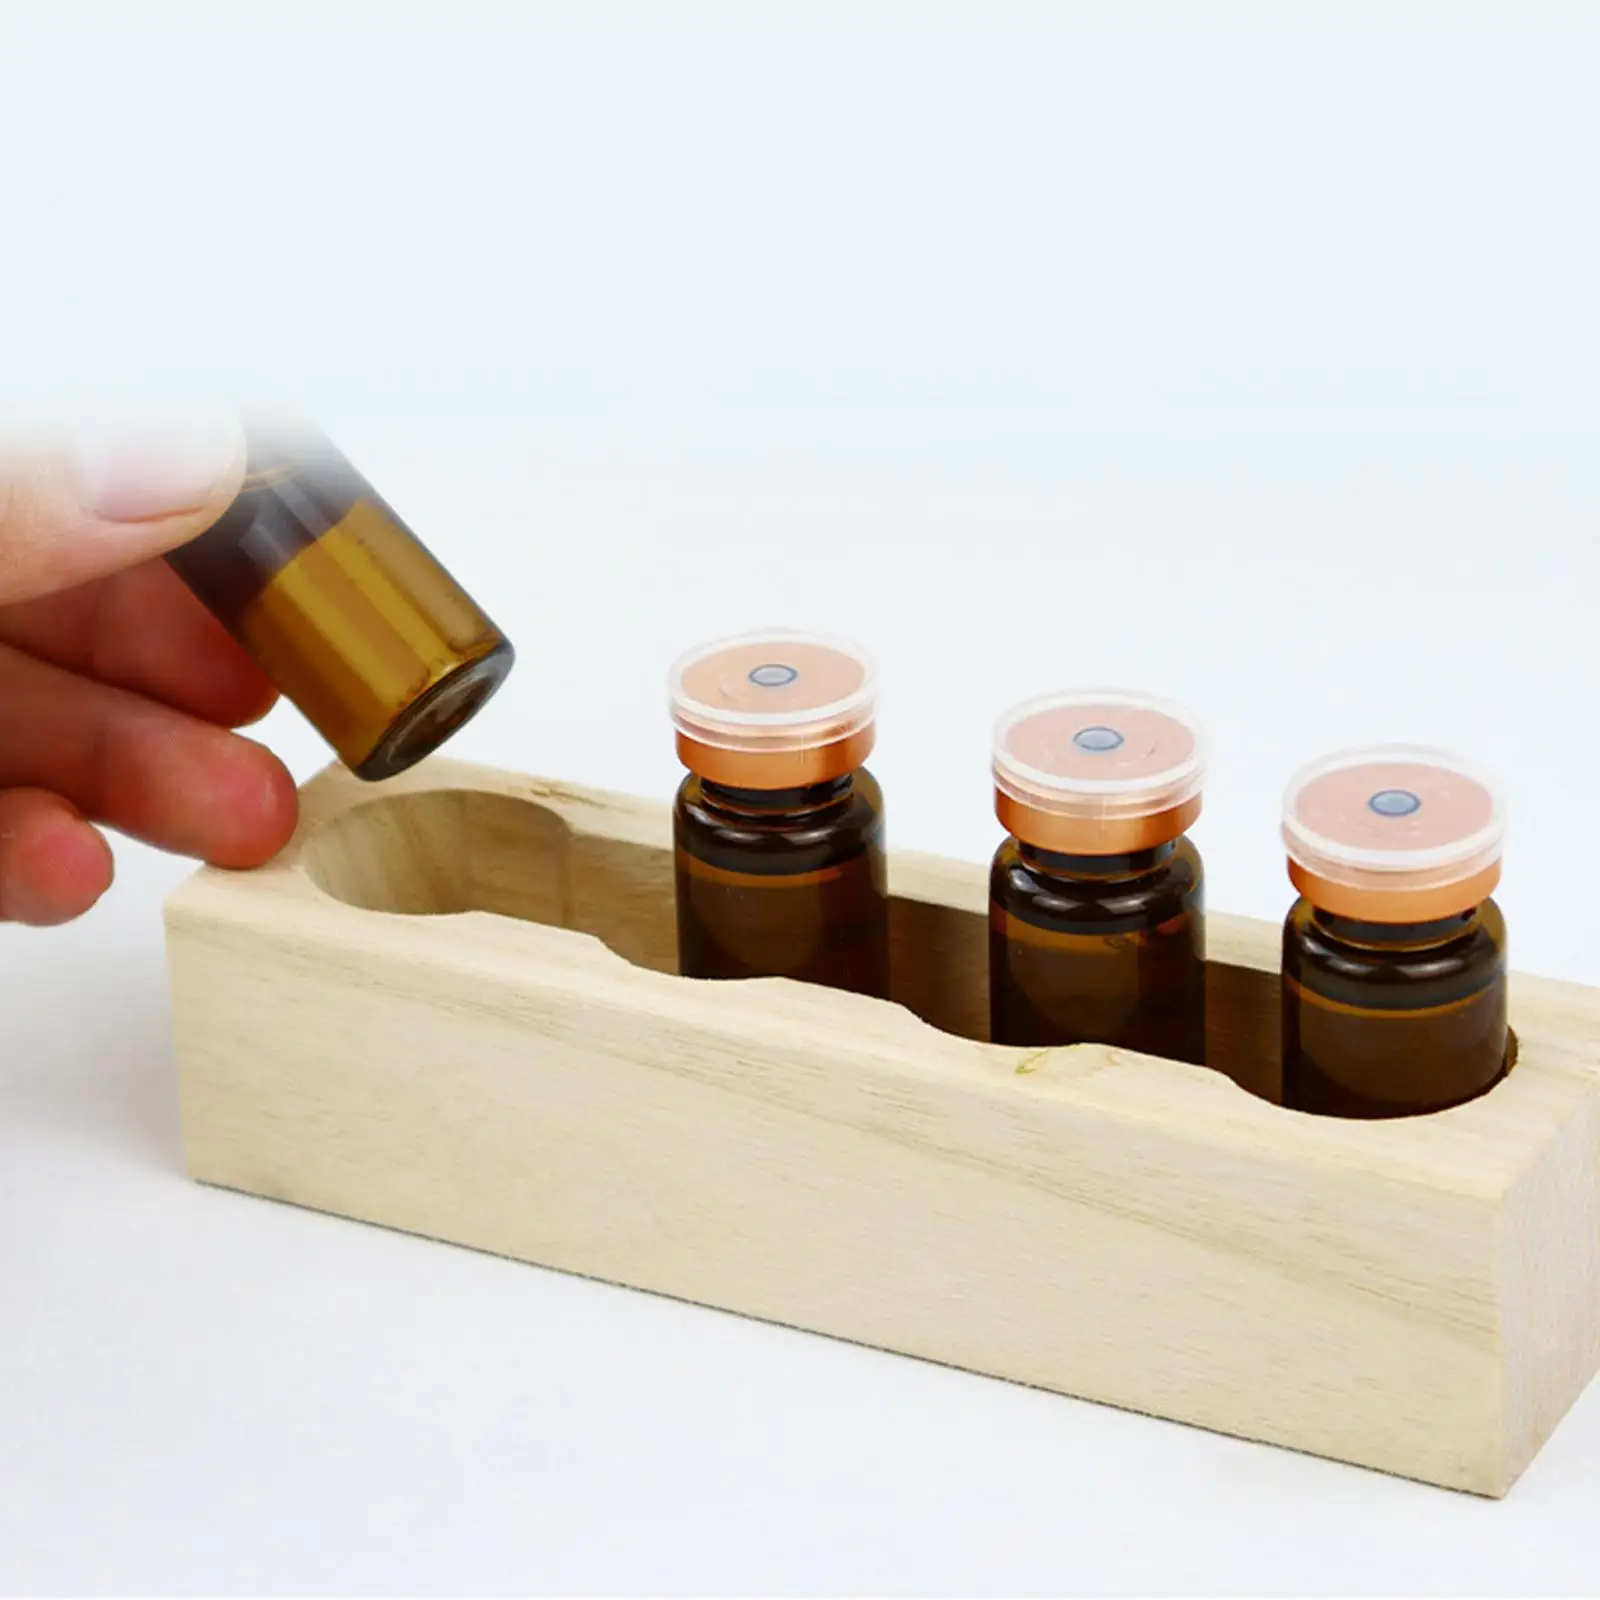 Essential Oil Display Stand Tabletop Display Shelf Wood Cosmetic Bottle Holder Organizer 4 Holes for Organizing Displaying